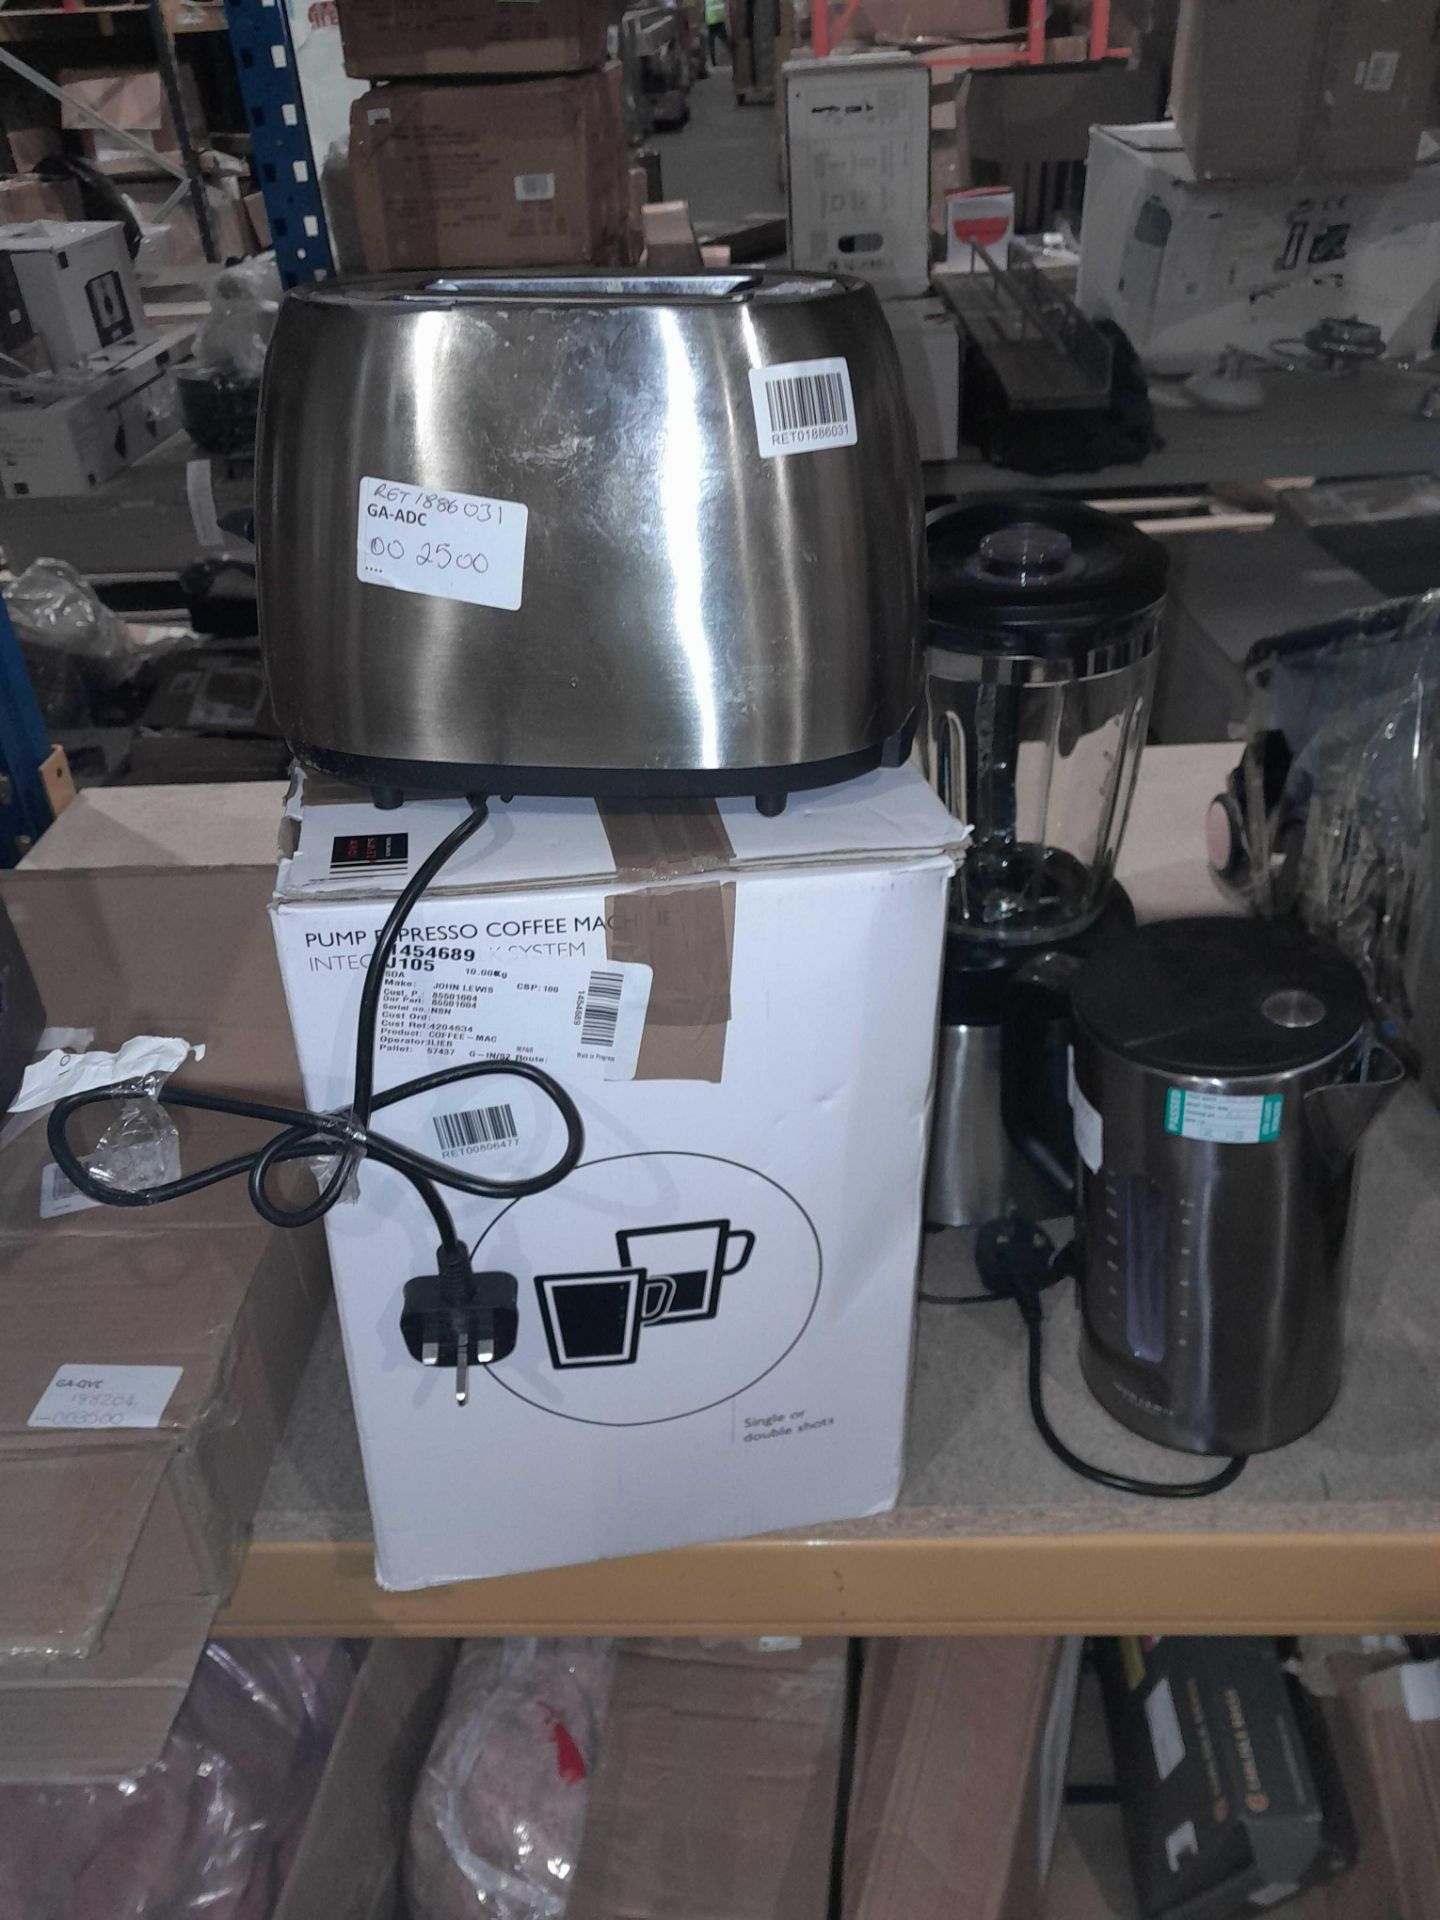 RRP £200 lot to contain pump espresso coffee machine, 2 slice toaster , blender & kettle - Image 2 of 4